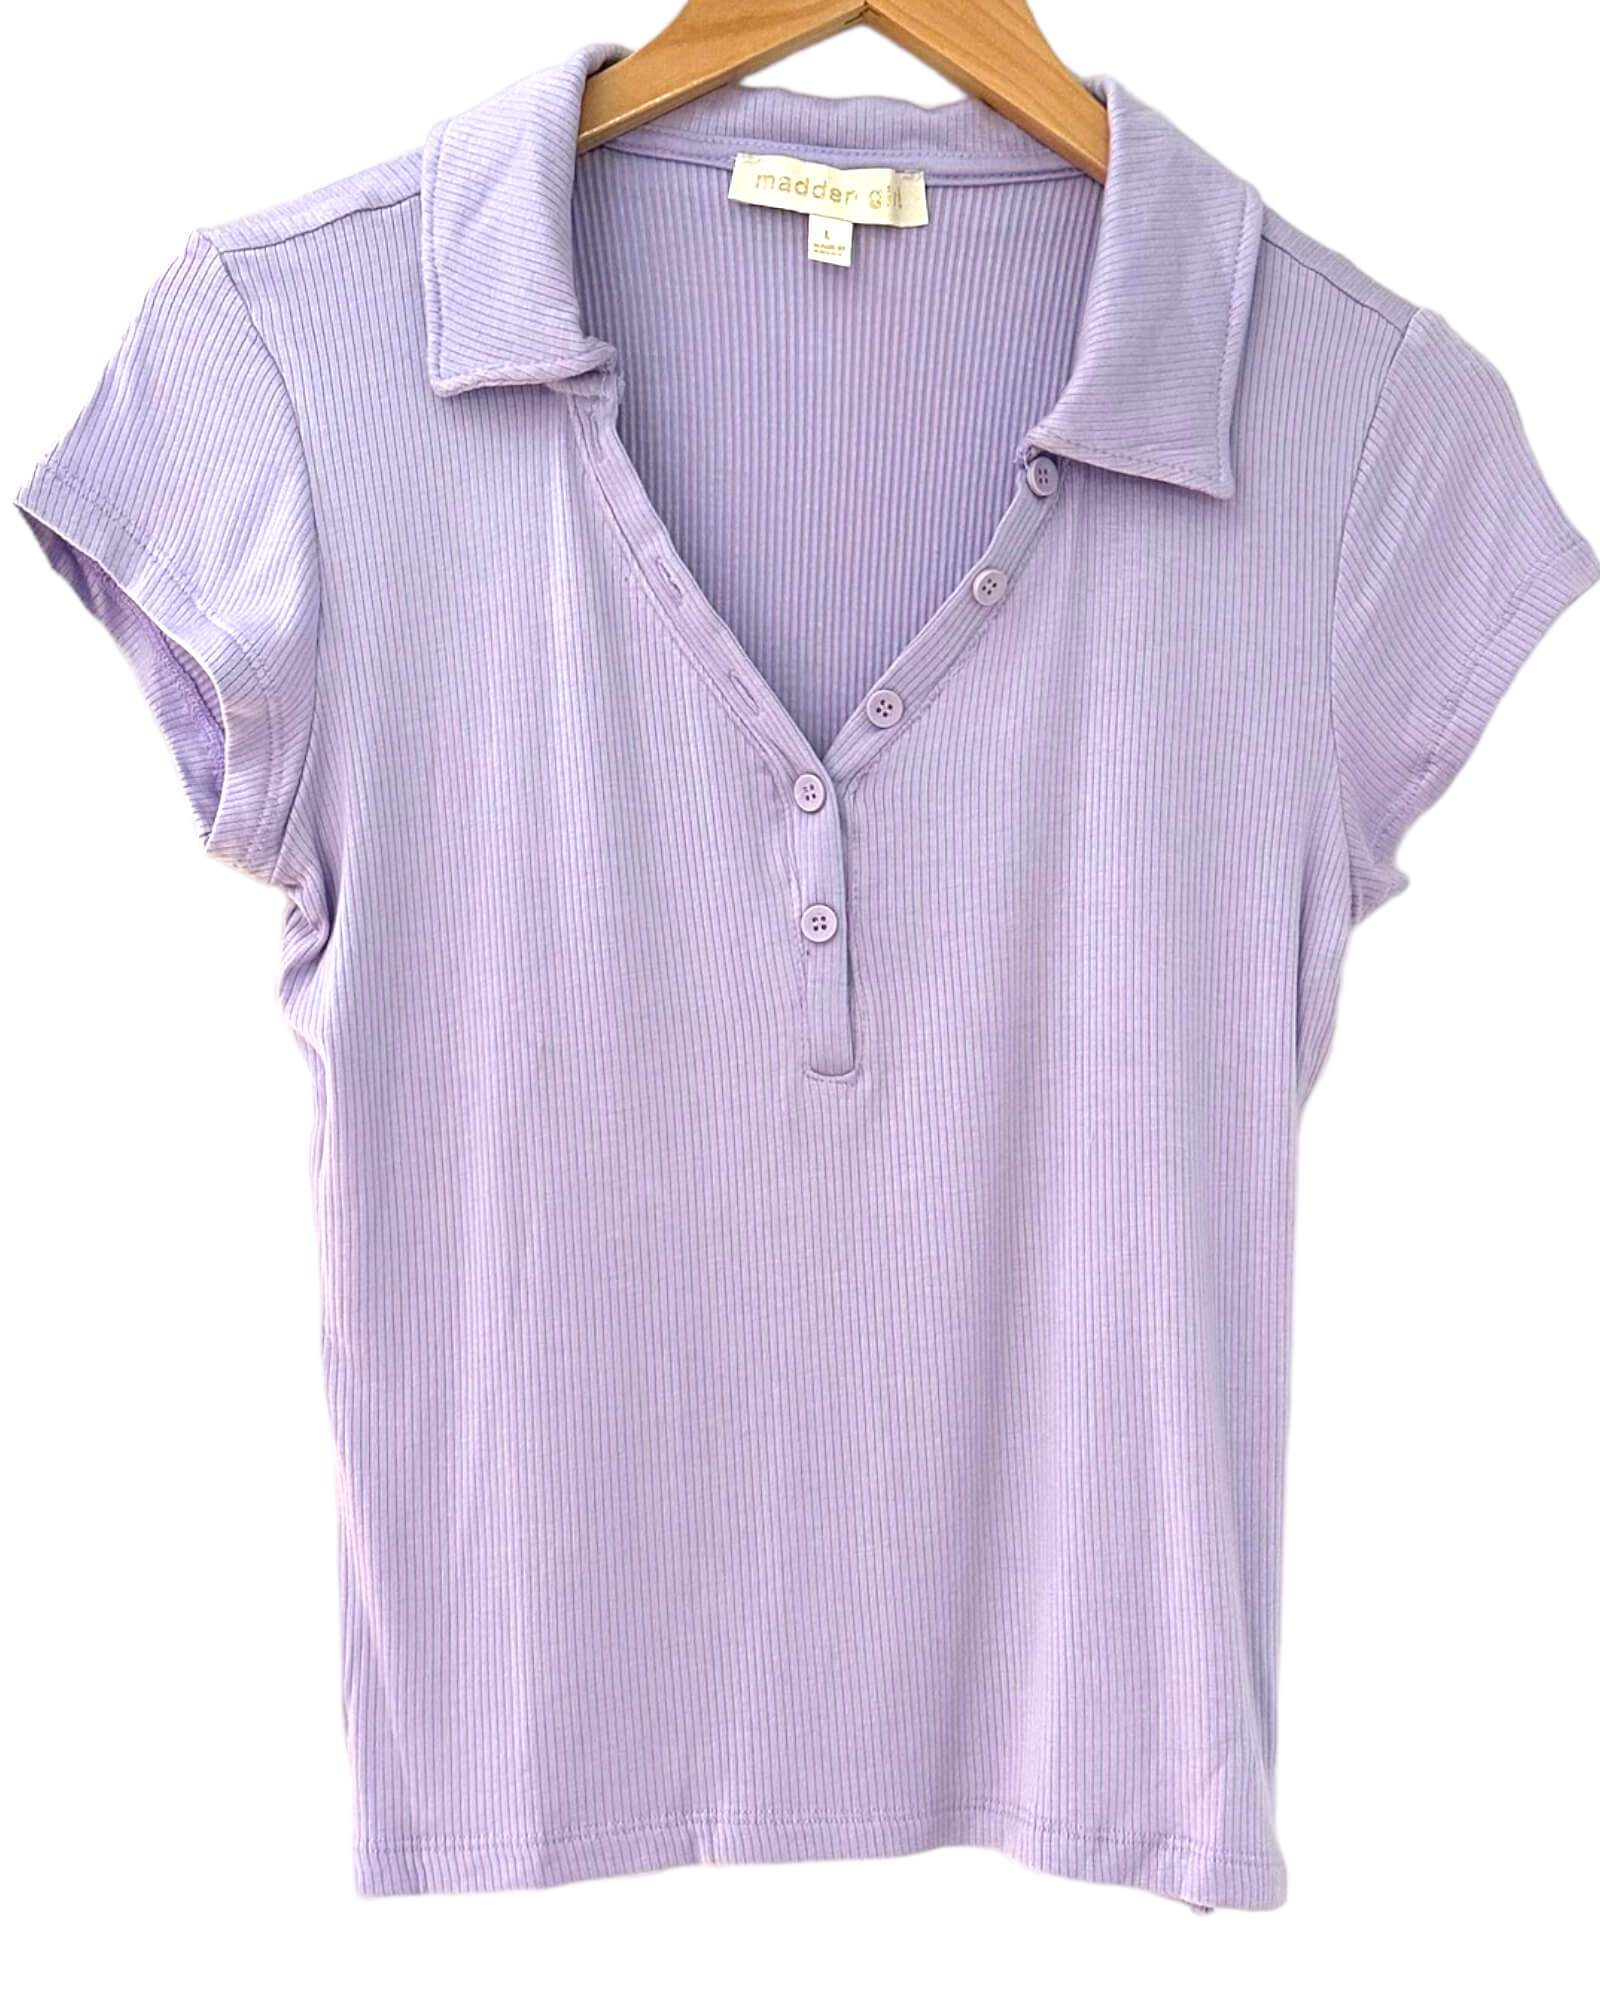 Cool Winter MADDEN GIRL lilac purple ribbed top